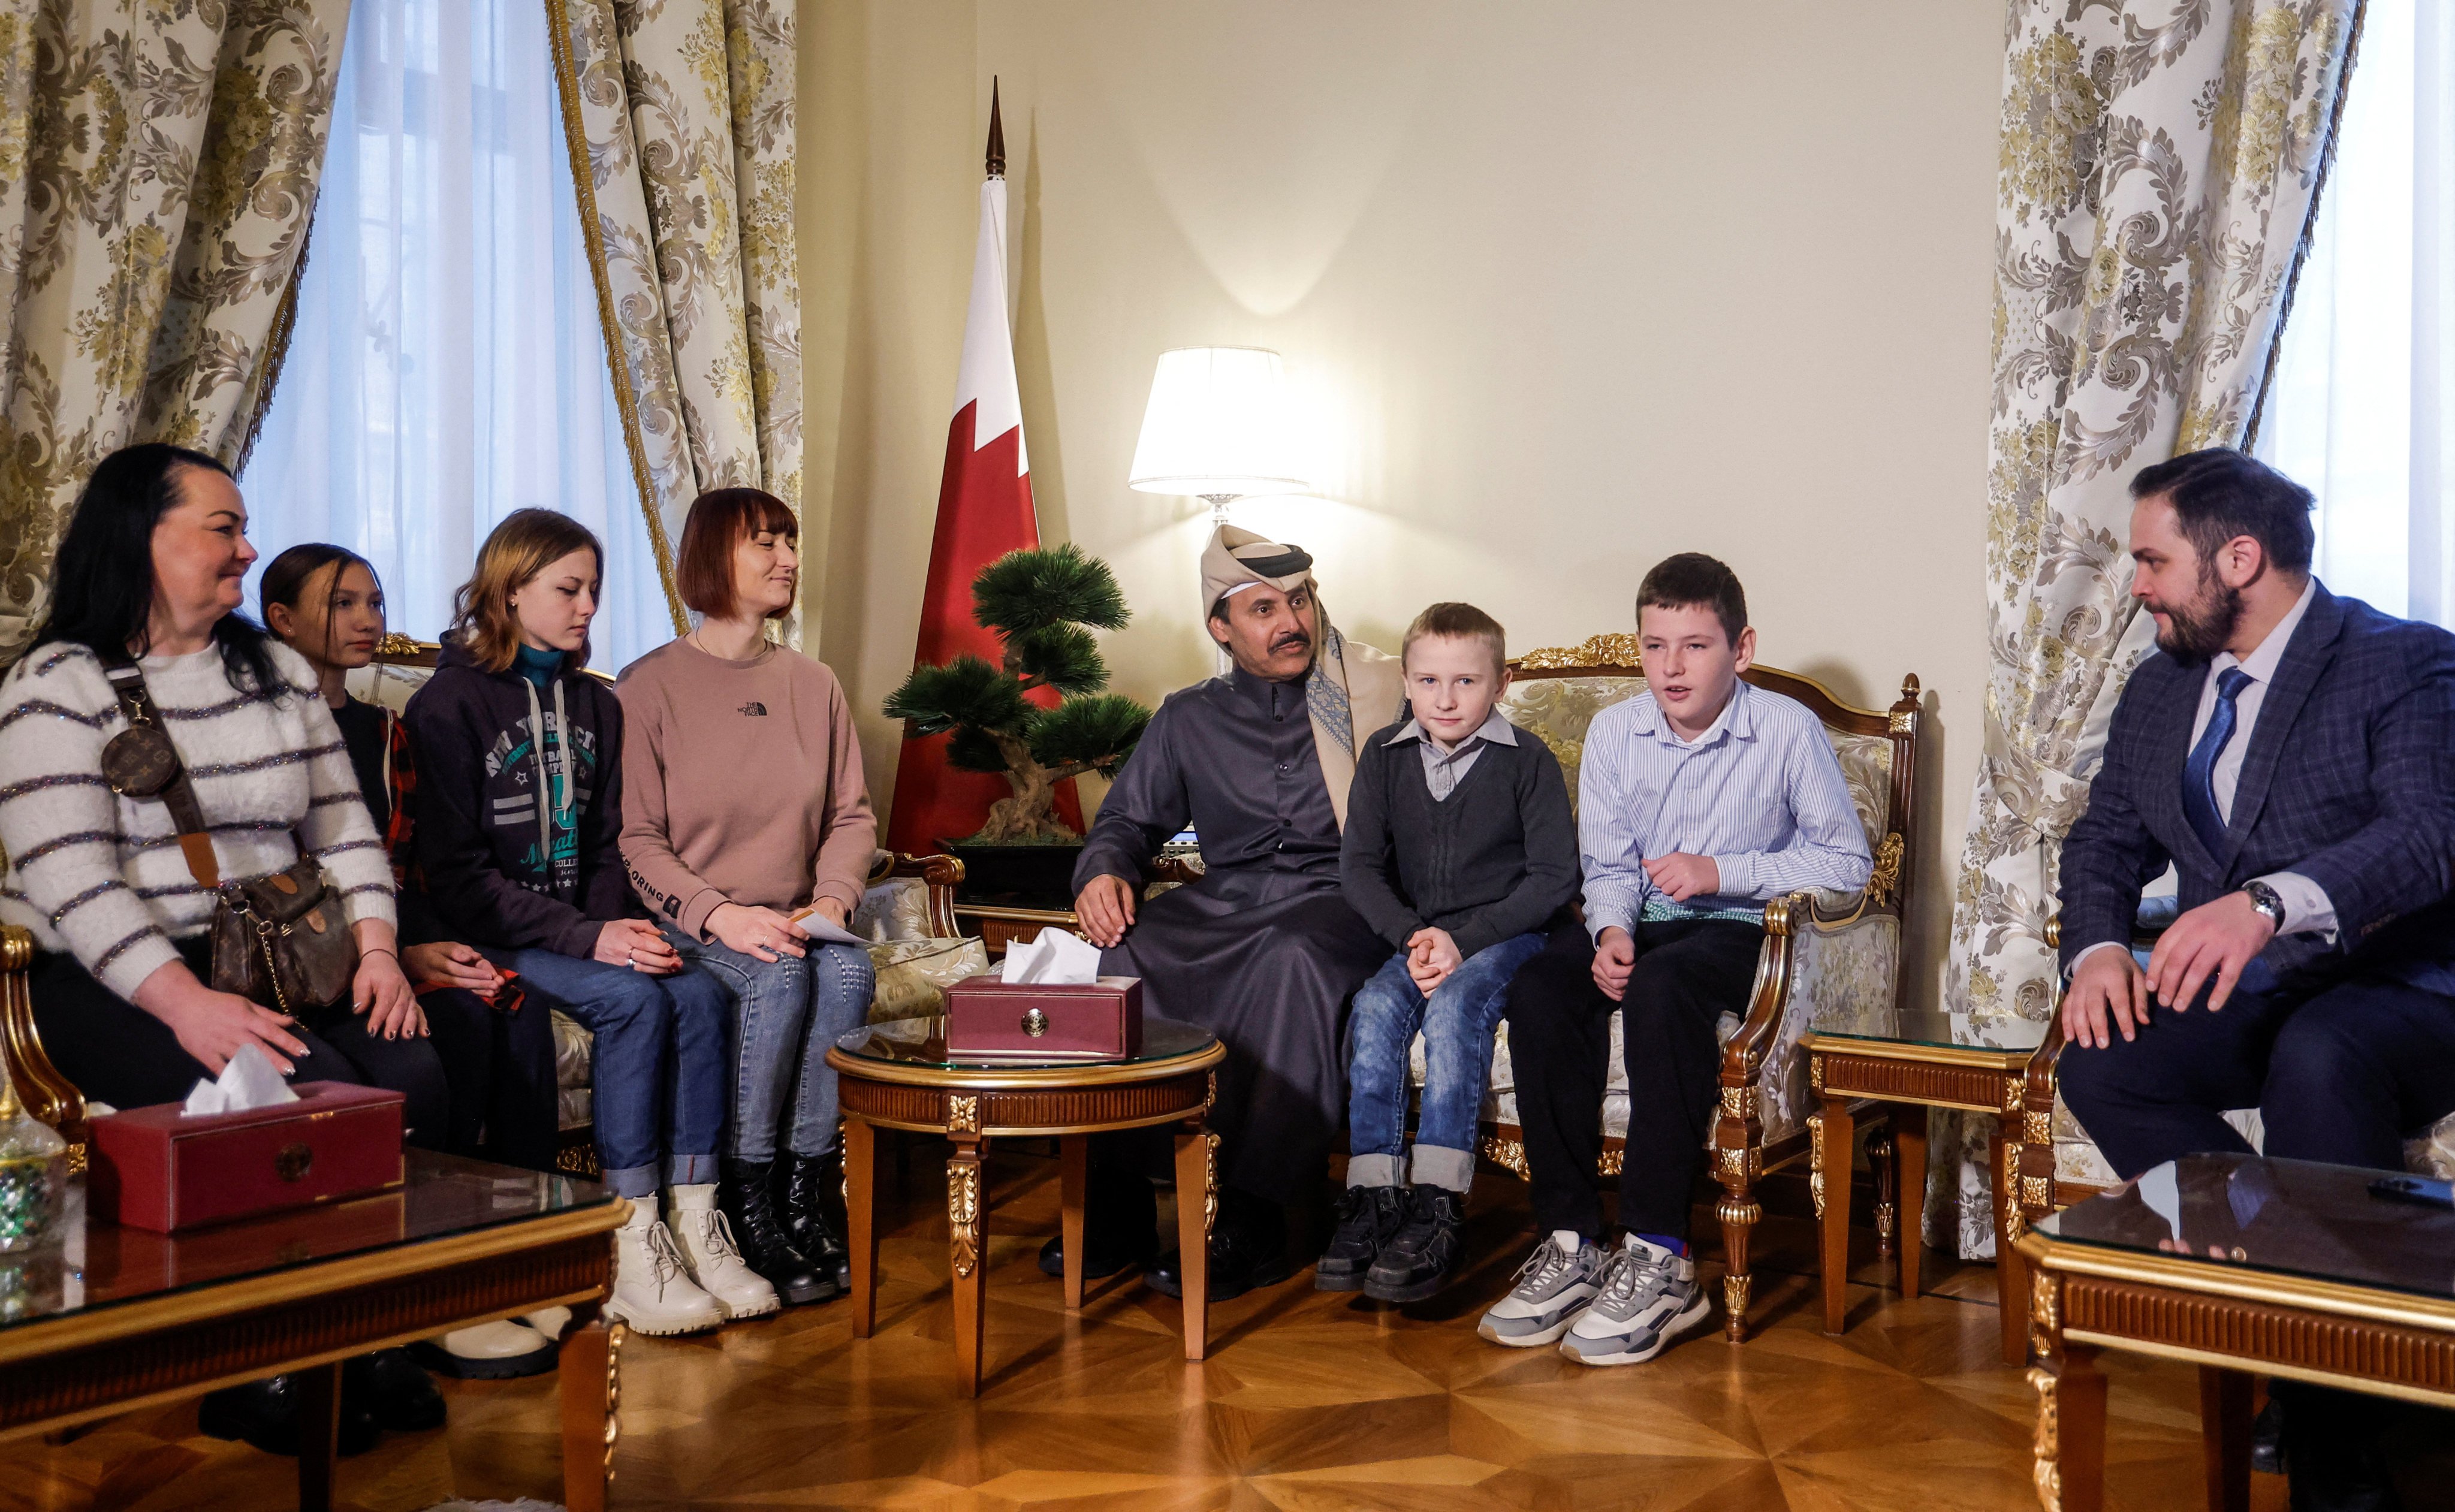 Sheikh Ahmed bin Nasser Al Thani, Ambassador of Qatar to Russia and Alexey Ghazaryan, Head of the Office of the Commissioner for Children’s Rights under the President of the Russian Federation, meet Ukrainian children and their families before their departure to Ukraine. Photo: Reuters